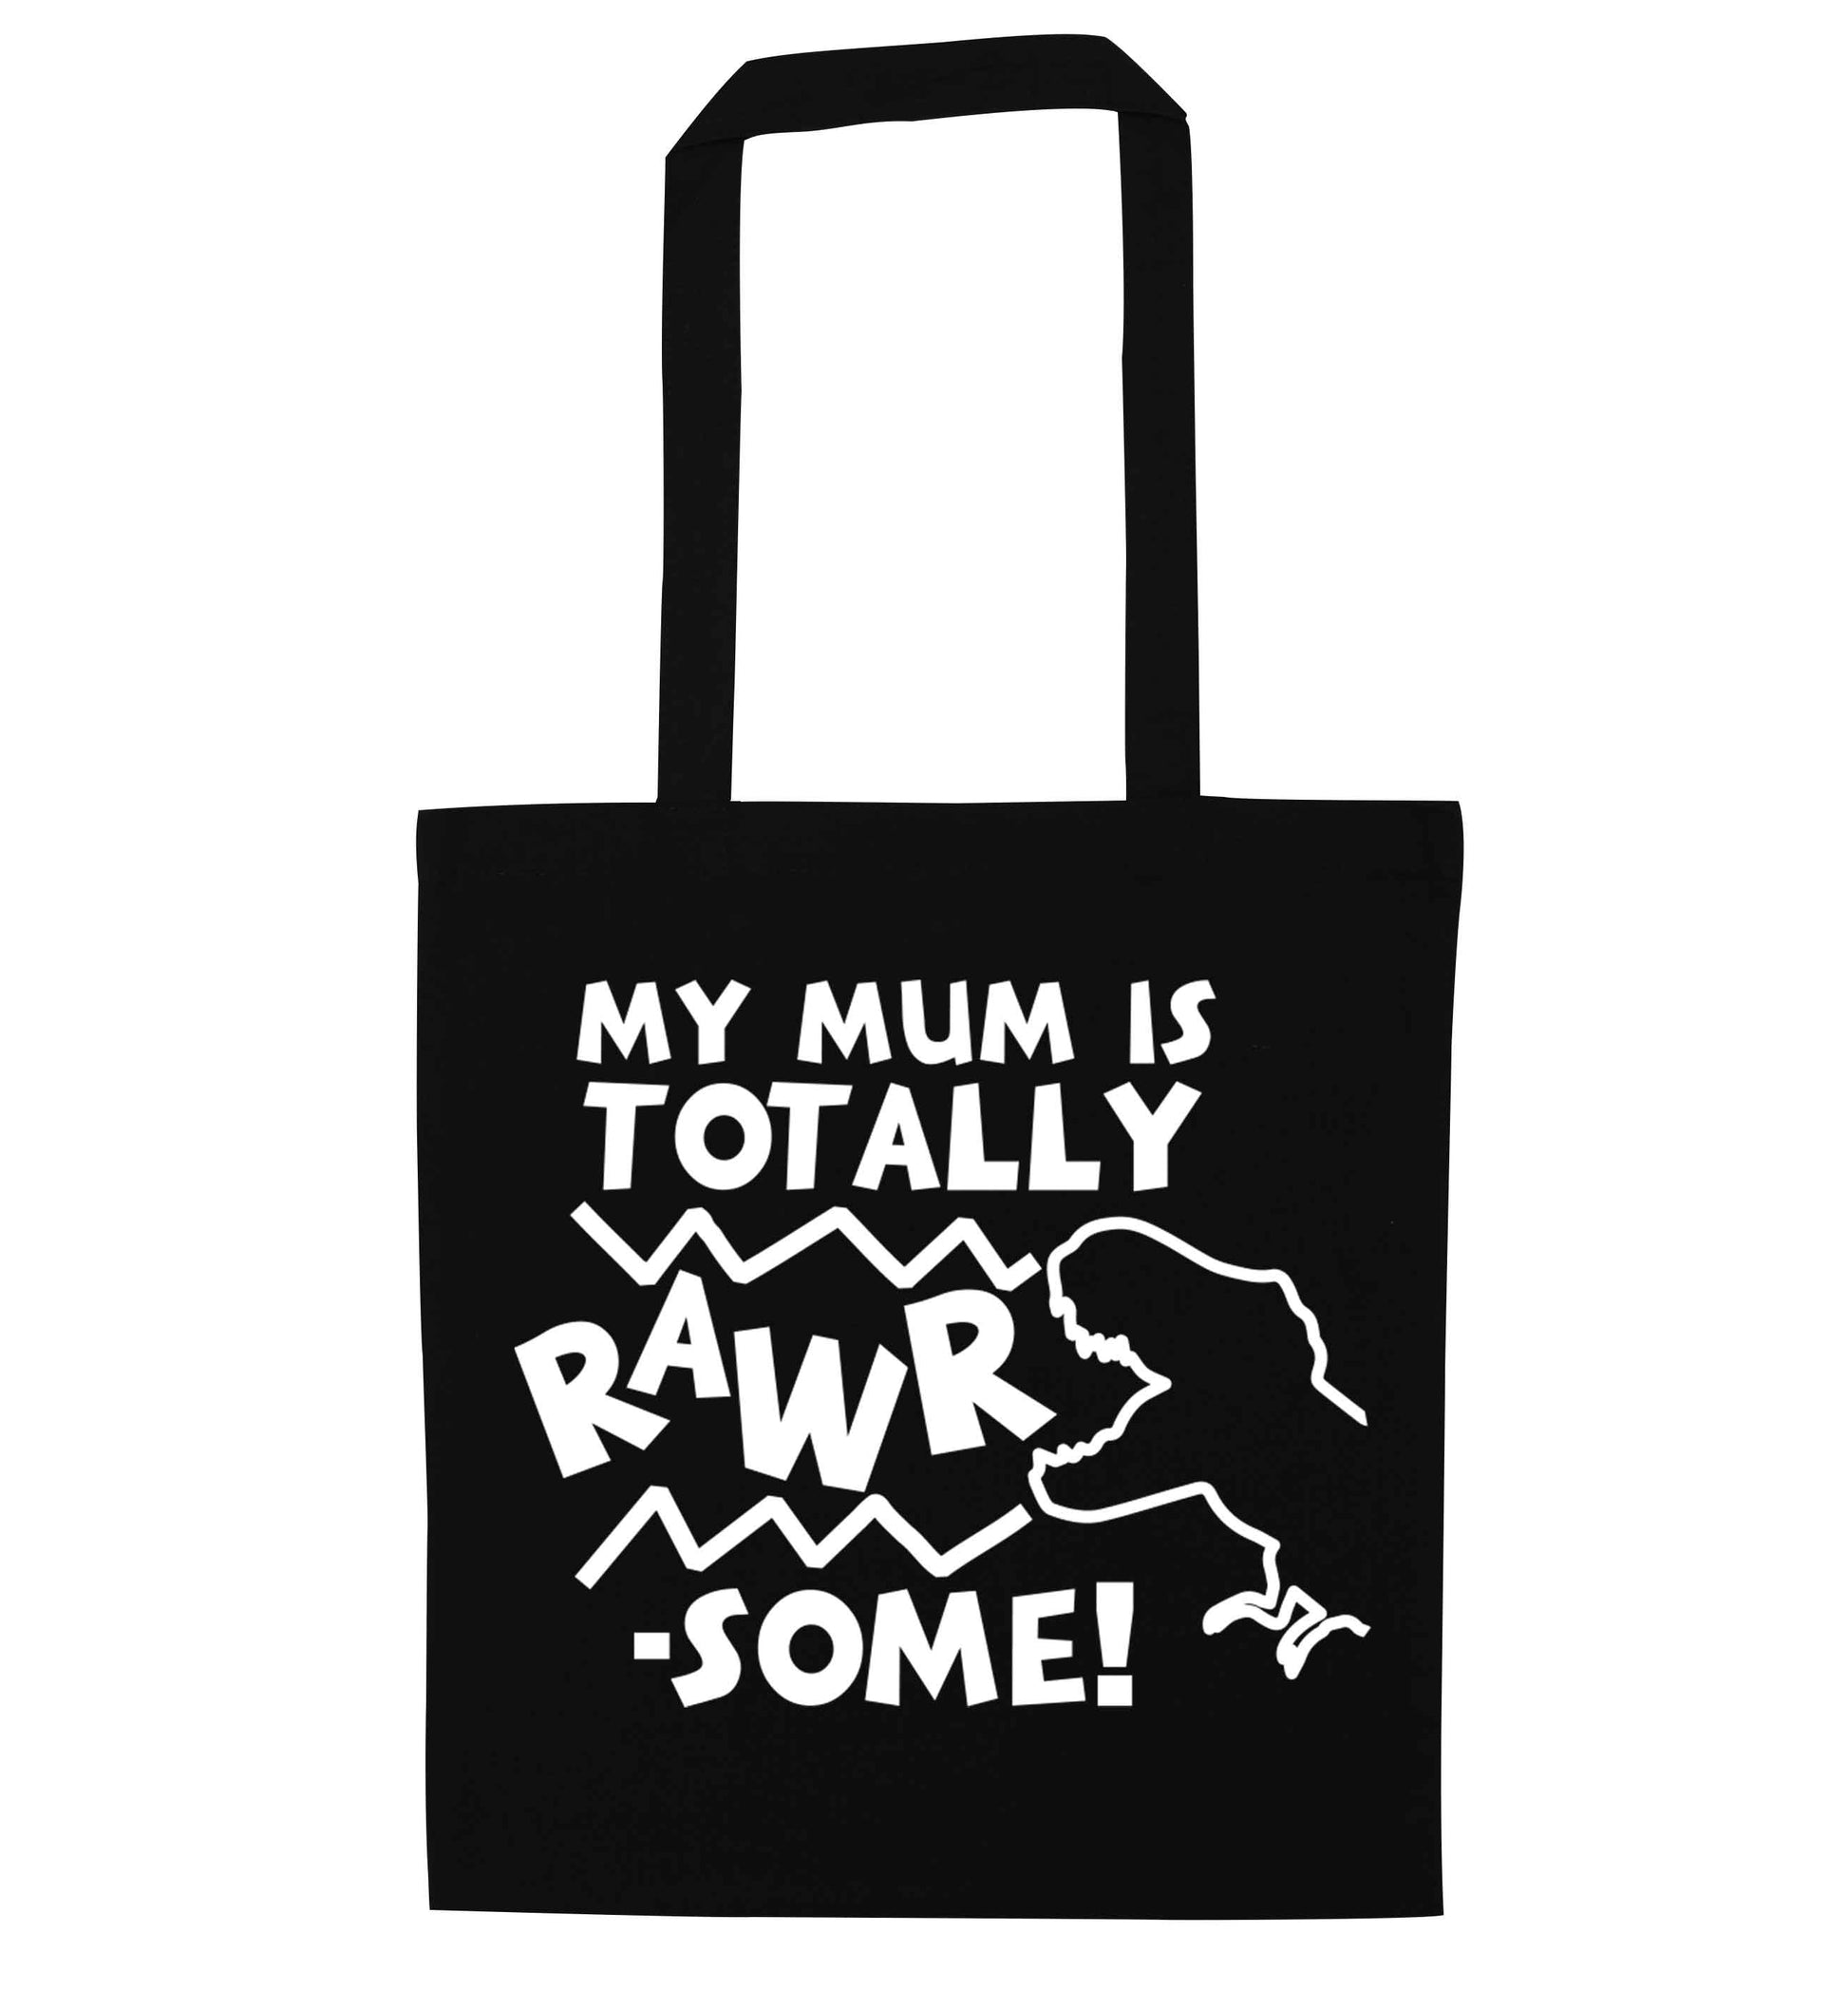 My mum is totally rawrsome black tote bag